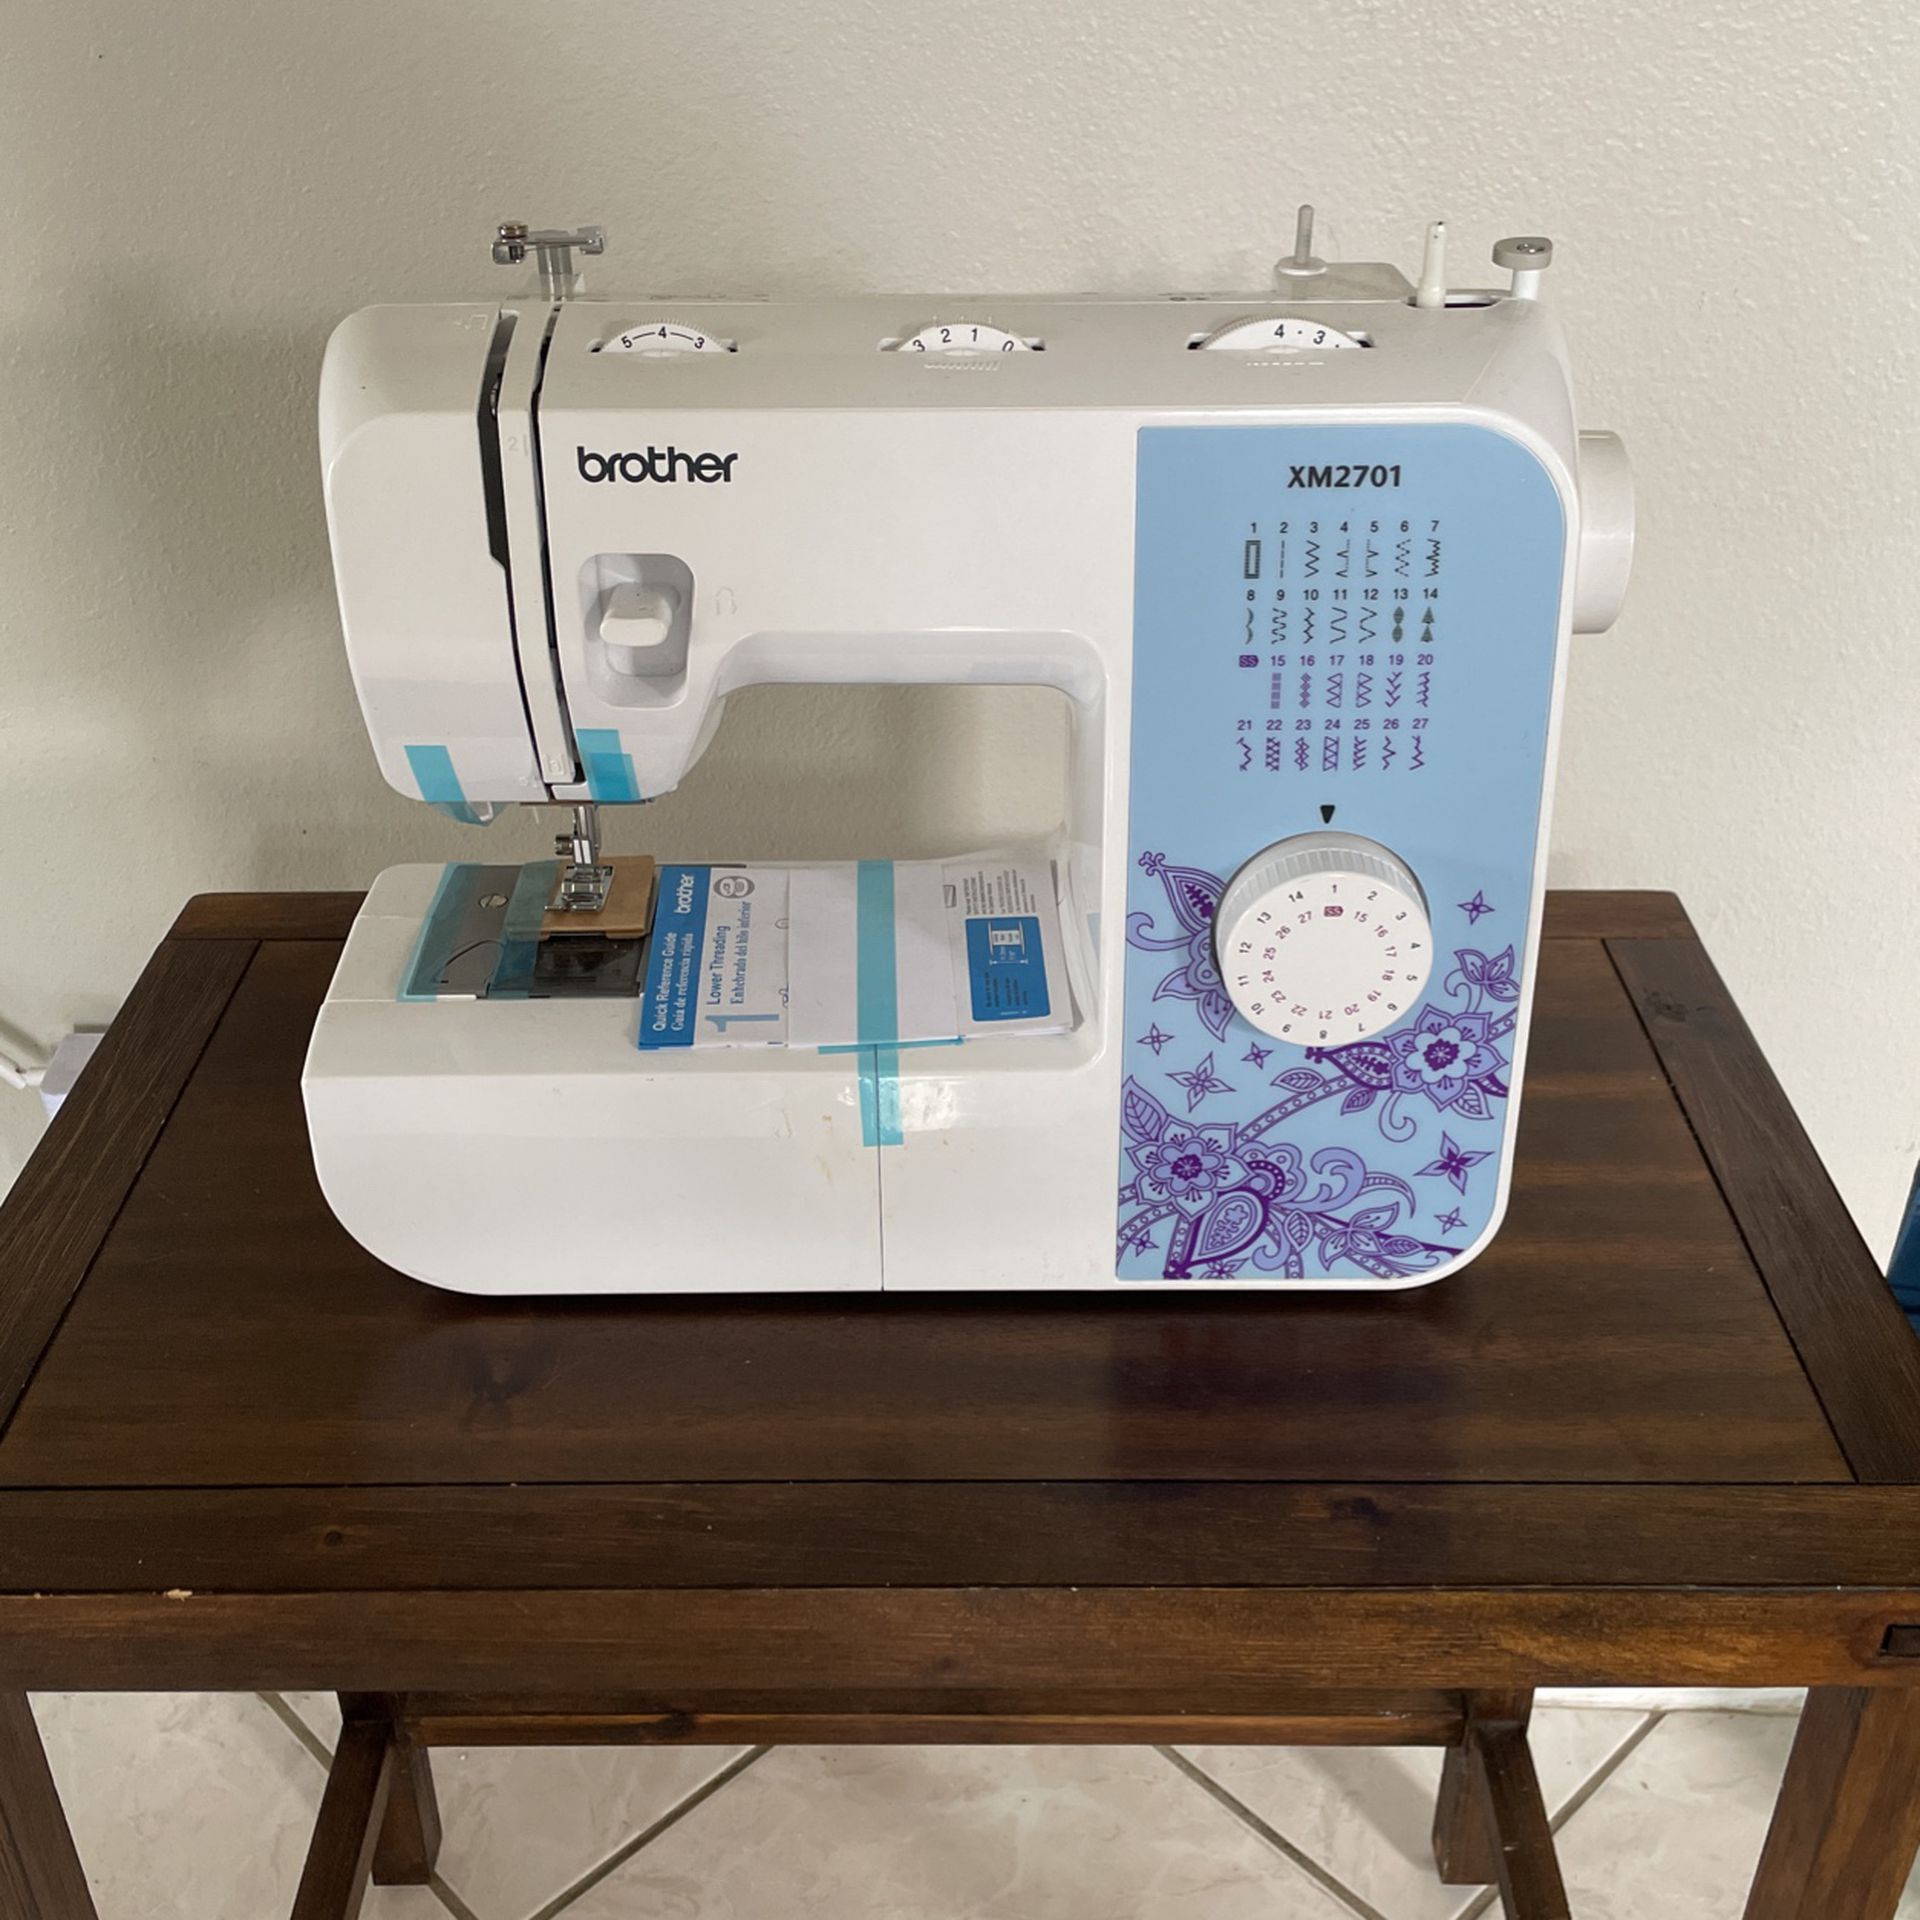 Brother XM2701 Sewing Machine for Sale in Rockledge, FL - OfferUp